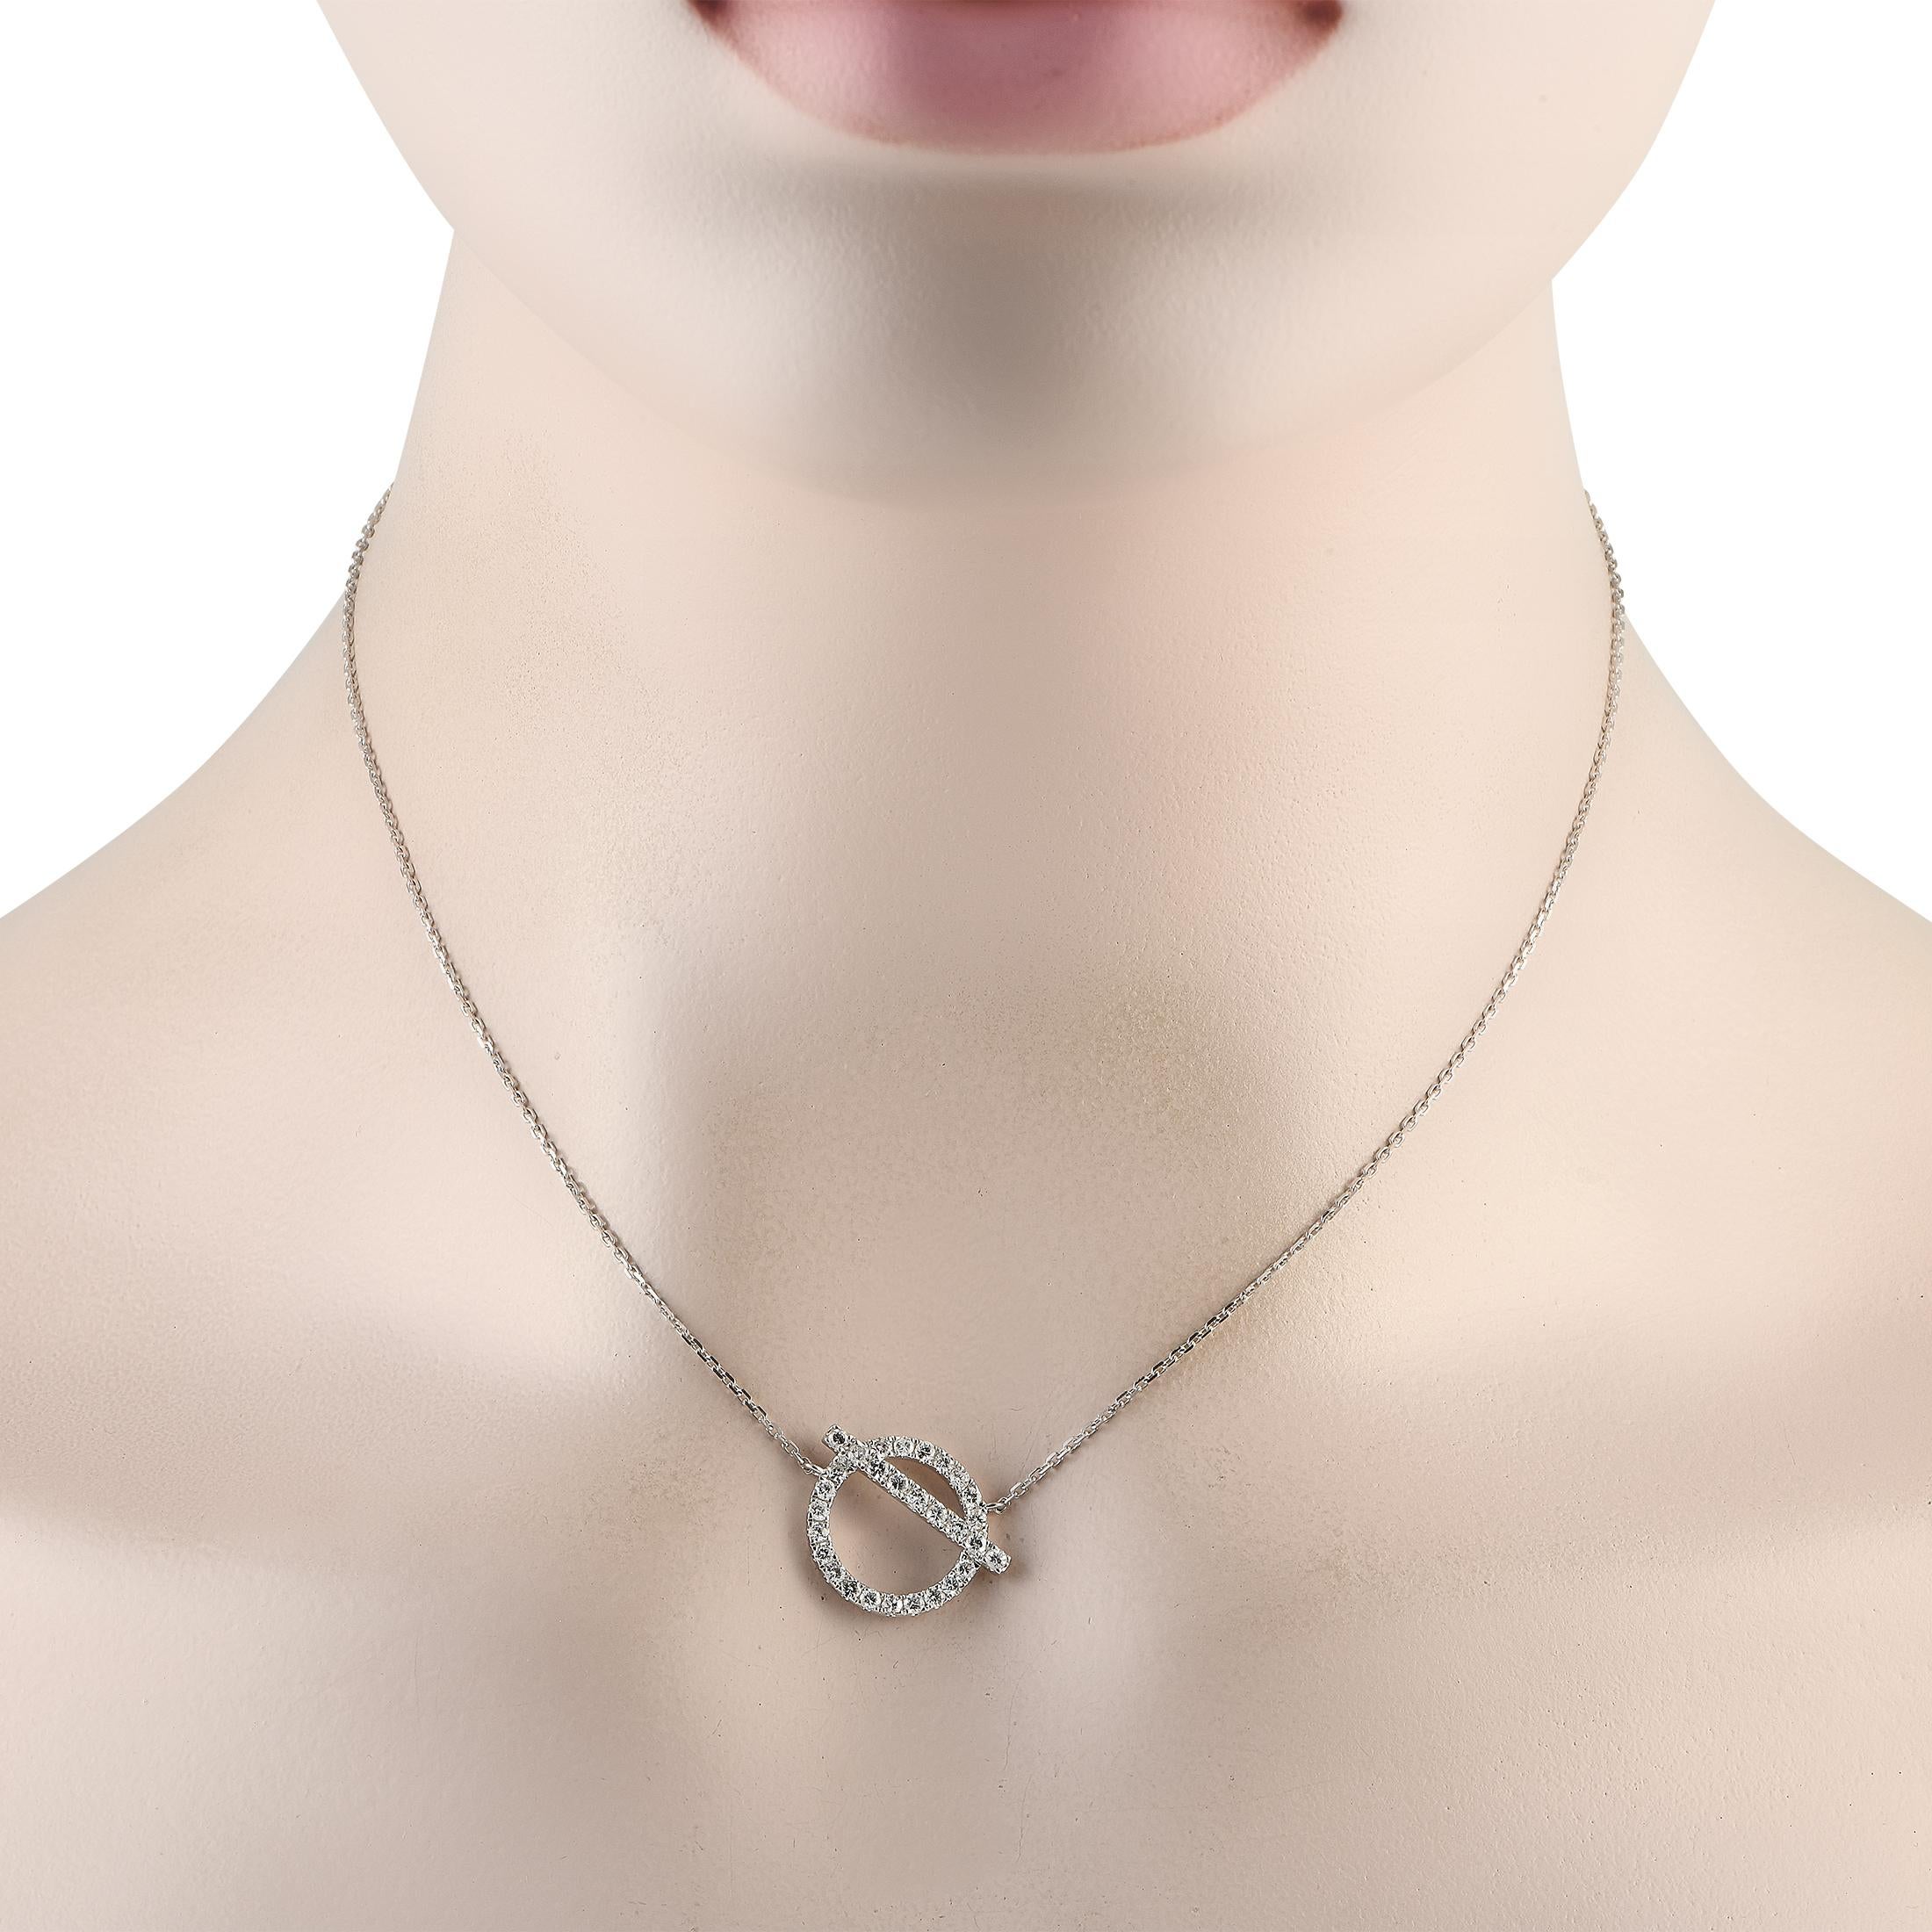 You won't go wrong with this wear-with-everything necklace. It features a toggle-inspired pendant, traced with round diamonds totaling 0.62 carats. This versatile accessory can instantly add class and a bit of edge to any outfit.Offered brand new,